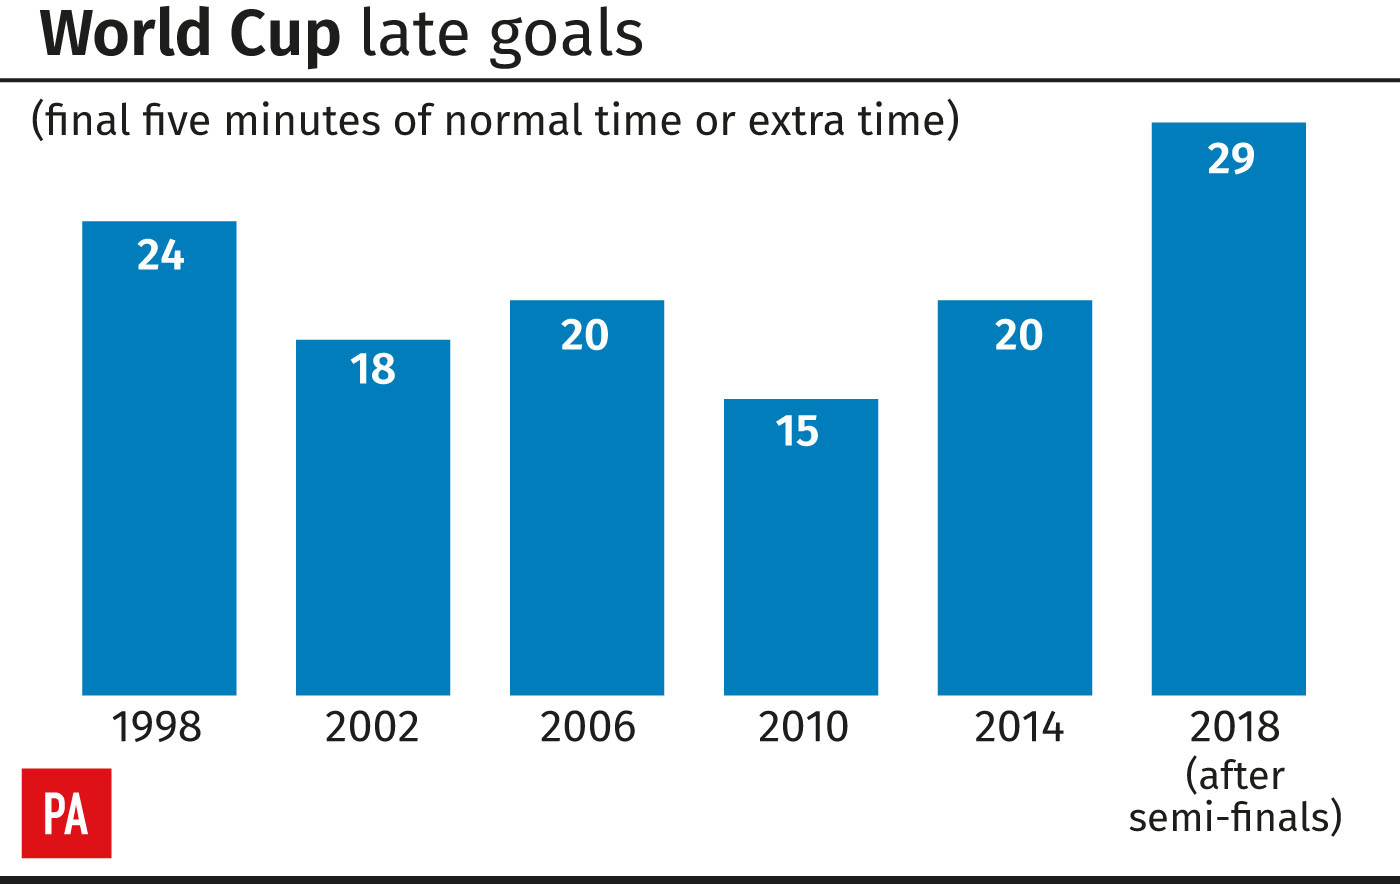 Late goals at World Cups since 1998